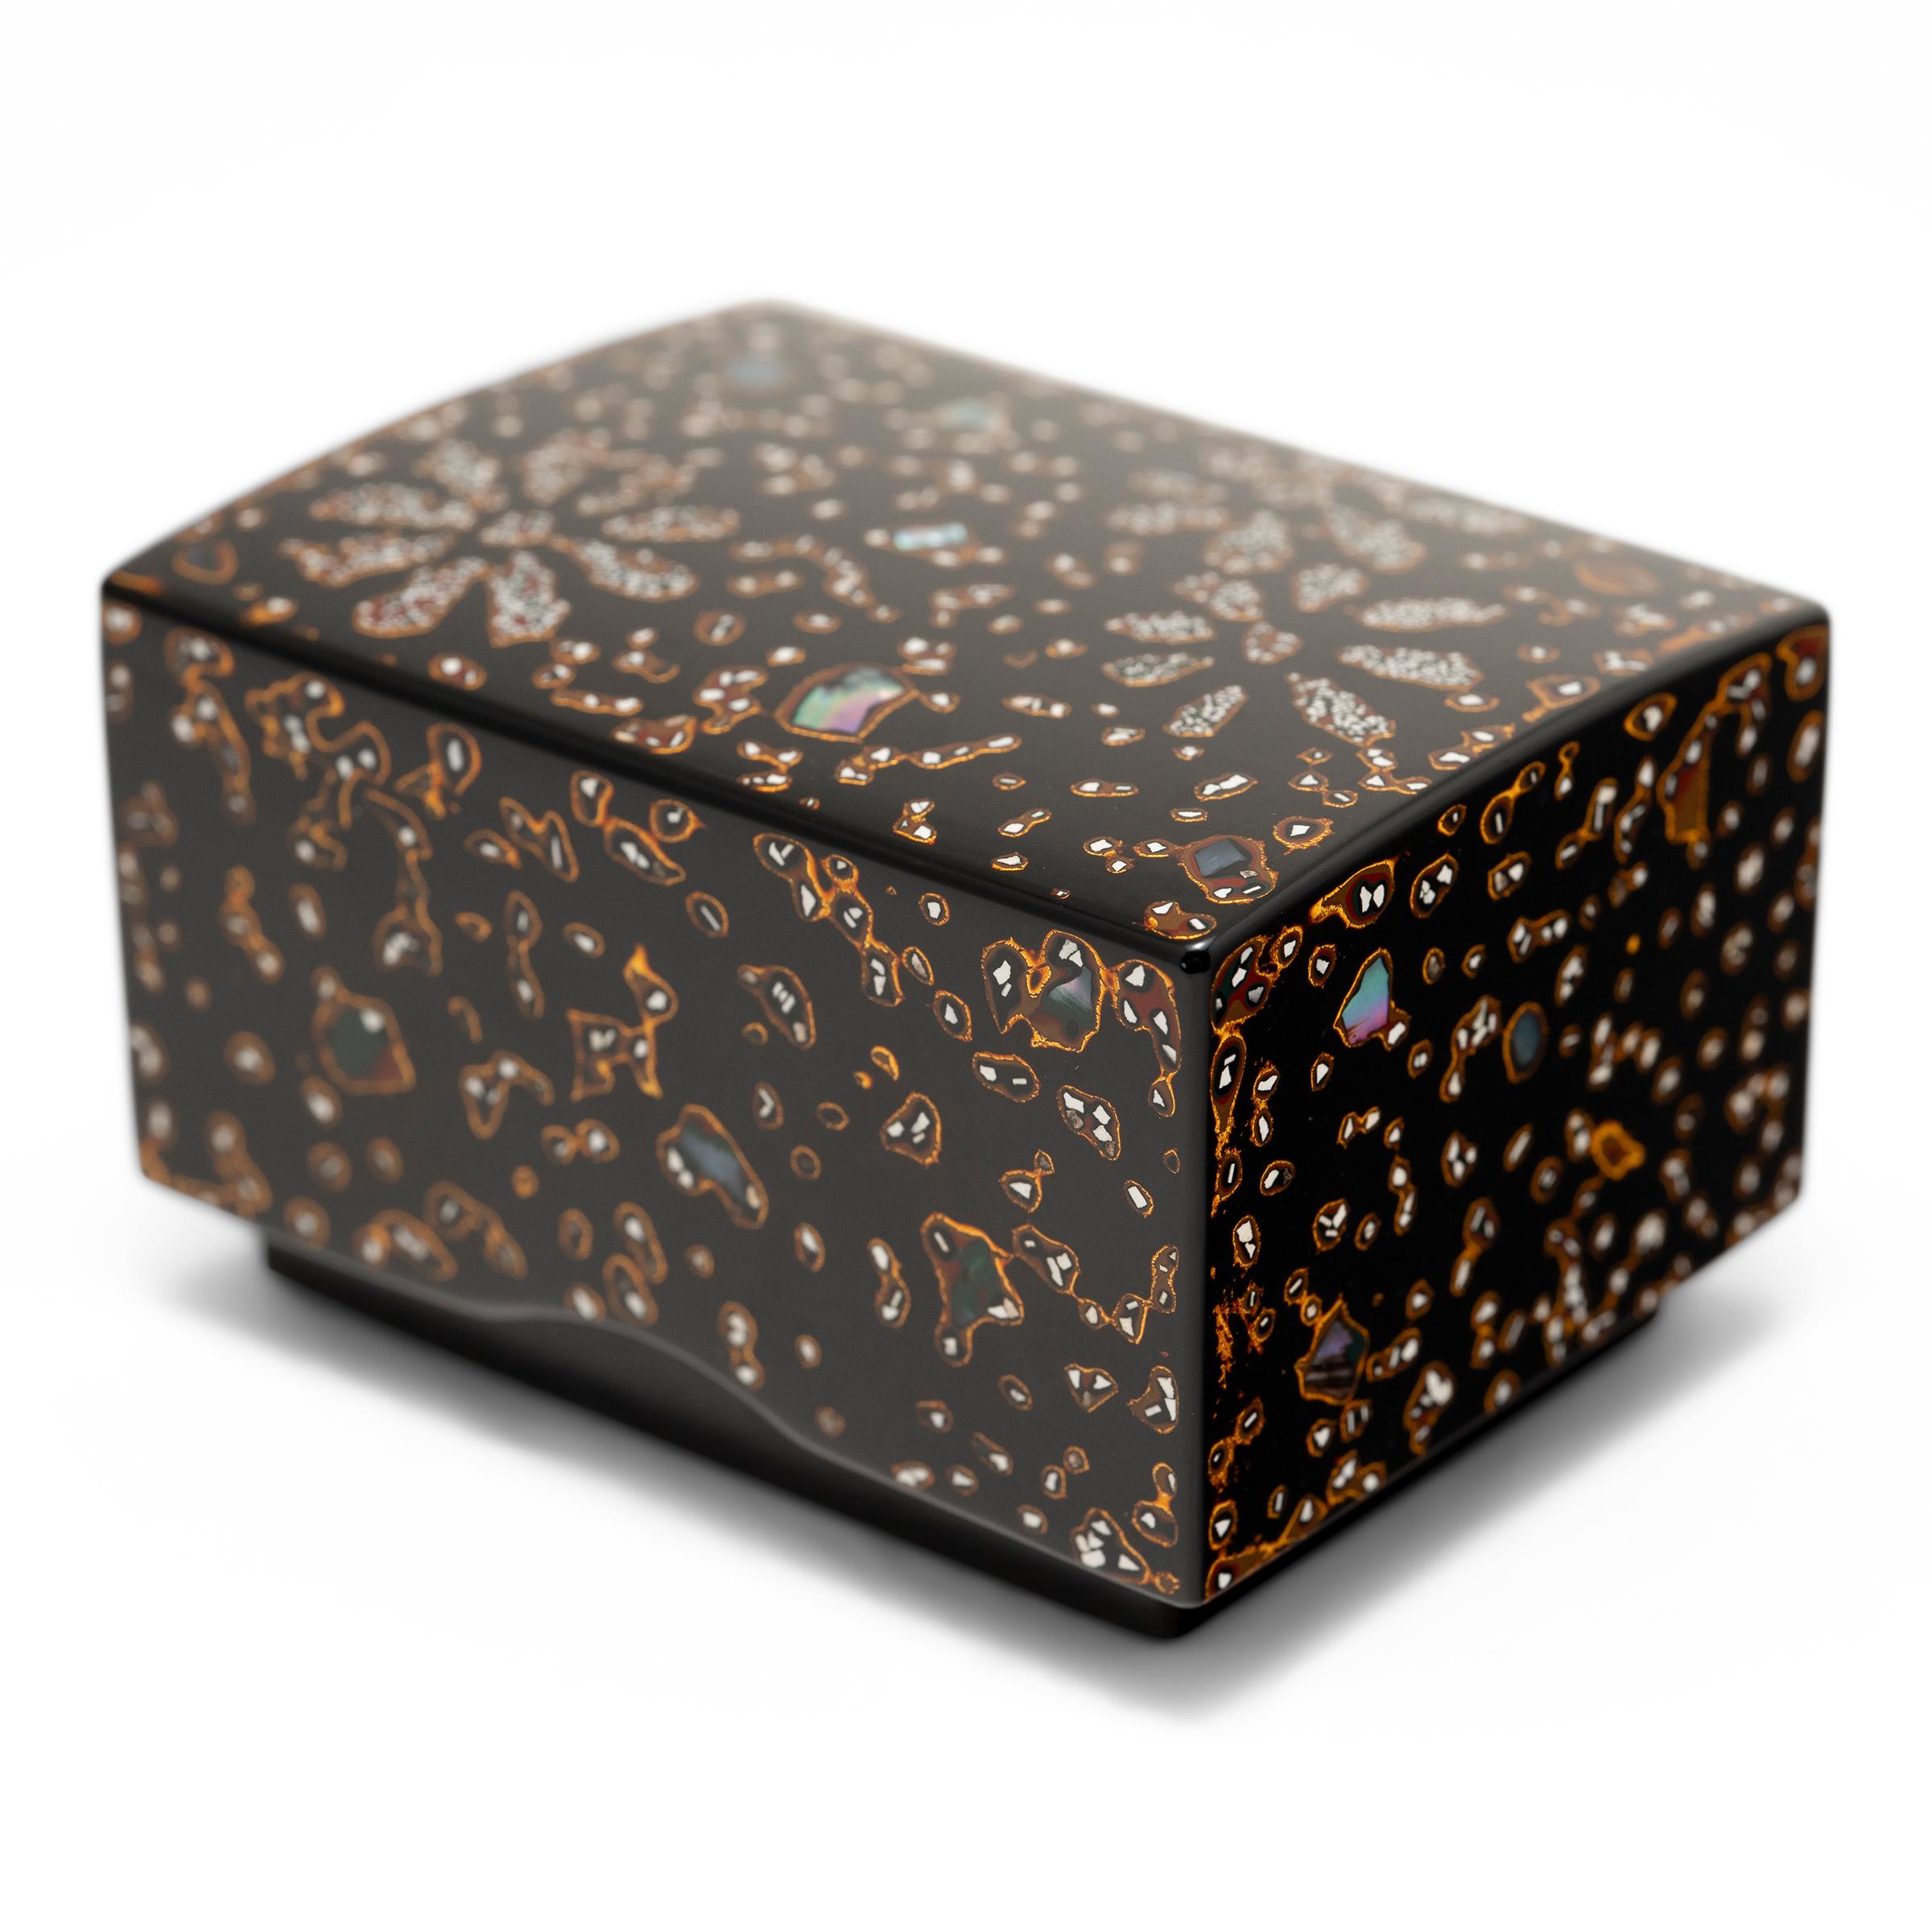 This petite Japanese keepsake box is decorated with a traditional lacquer technique known as tsugaru-nuri, wherein lacquer flecked with bits of shell and gold powder was carefully poured over a wooden substrate and sanded to reveal a gorgeous